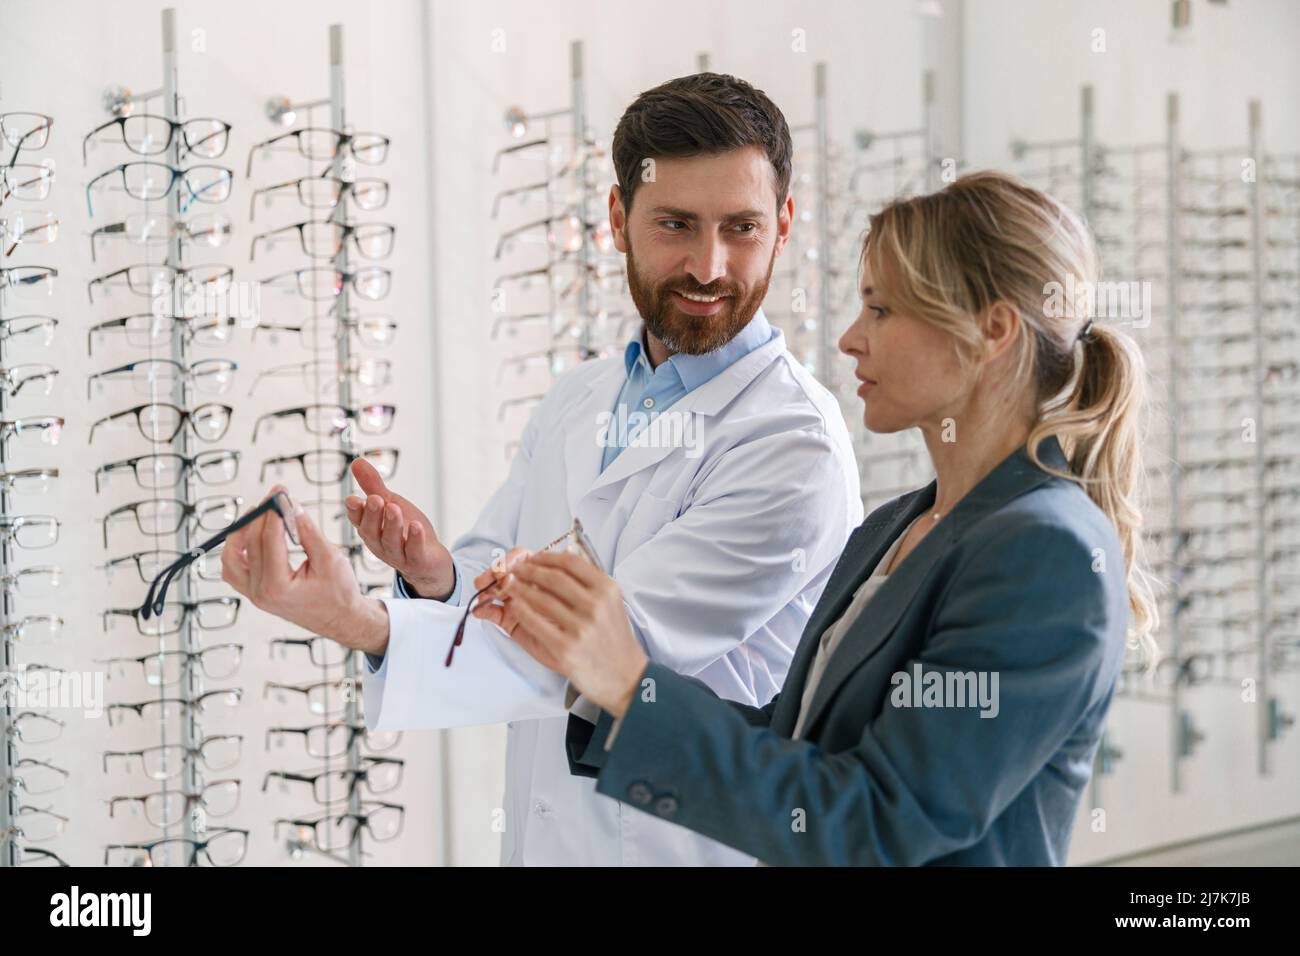 The ophthalmologist helps the client to choose a more suitable spectacle frame in optical store Stock Photo